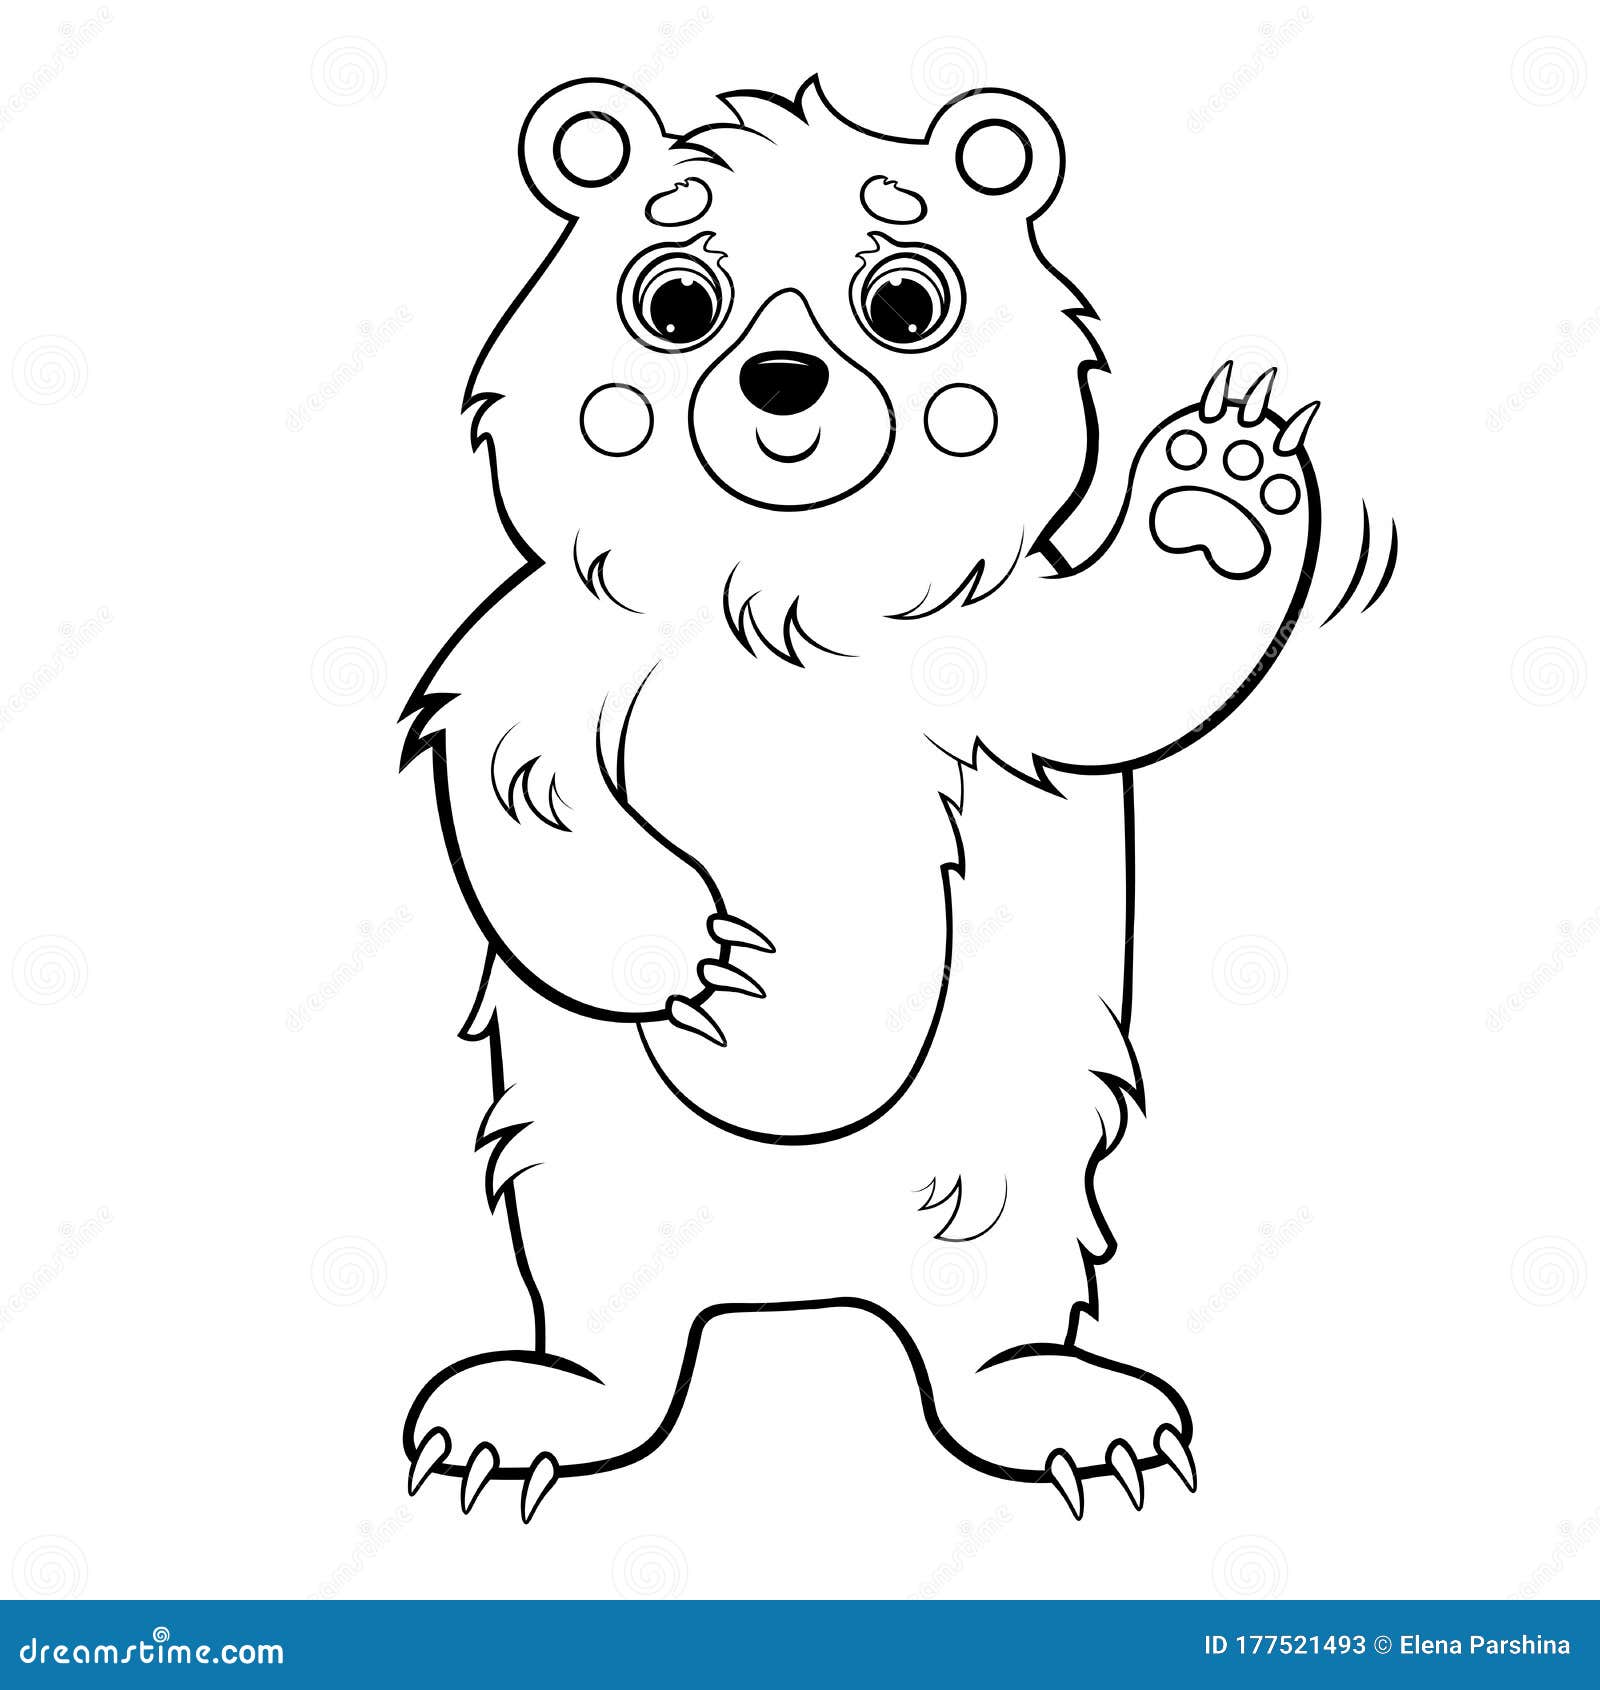 Coloring Page Outline of a Waving Cartoon Bear. Vector Image Isolated on  White Background Stock Vector - Illustration of drawing, forest: 177521493